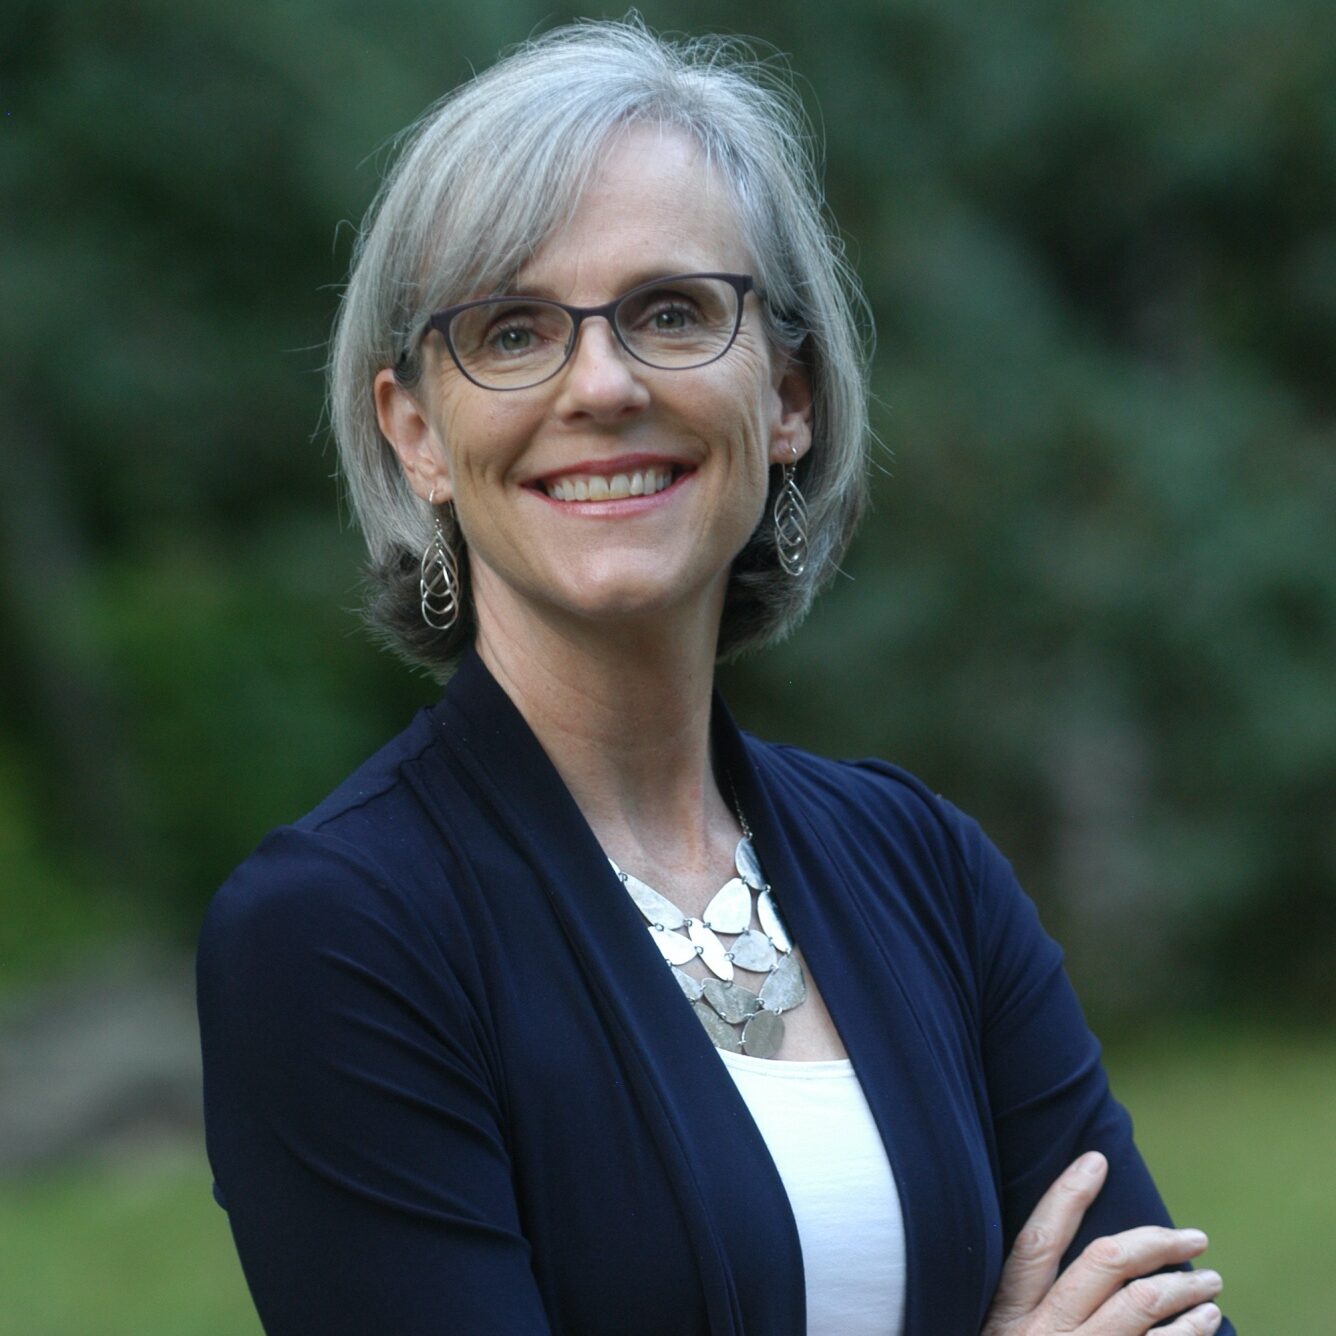 headshot Sage Wheeler, photo of white woman with gray bobbed hair, glasses and wearing silver earring and large silver necklace with navy cardigan and white tank top, standing outdoors